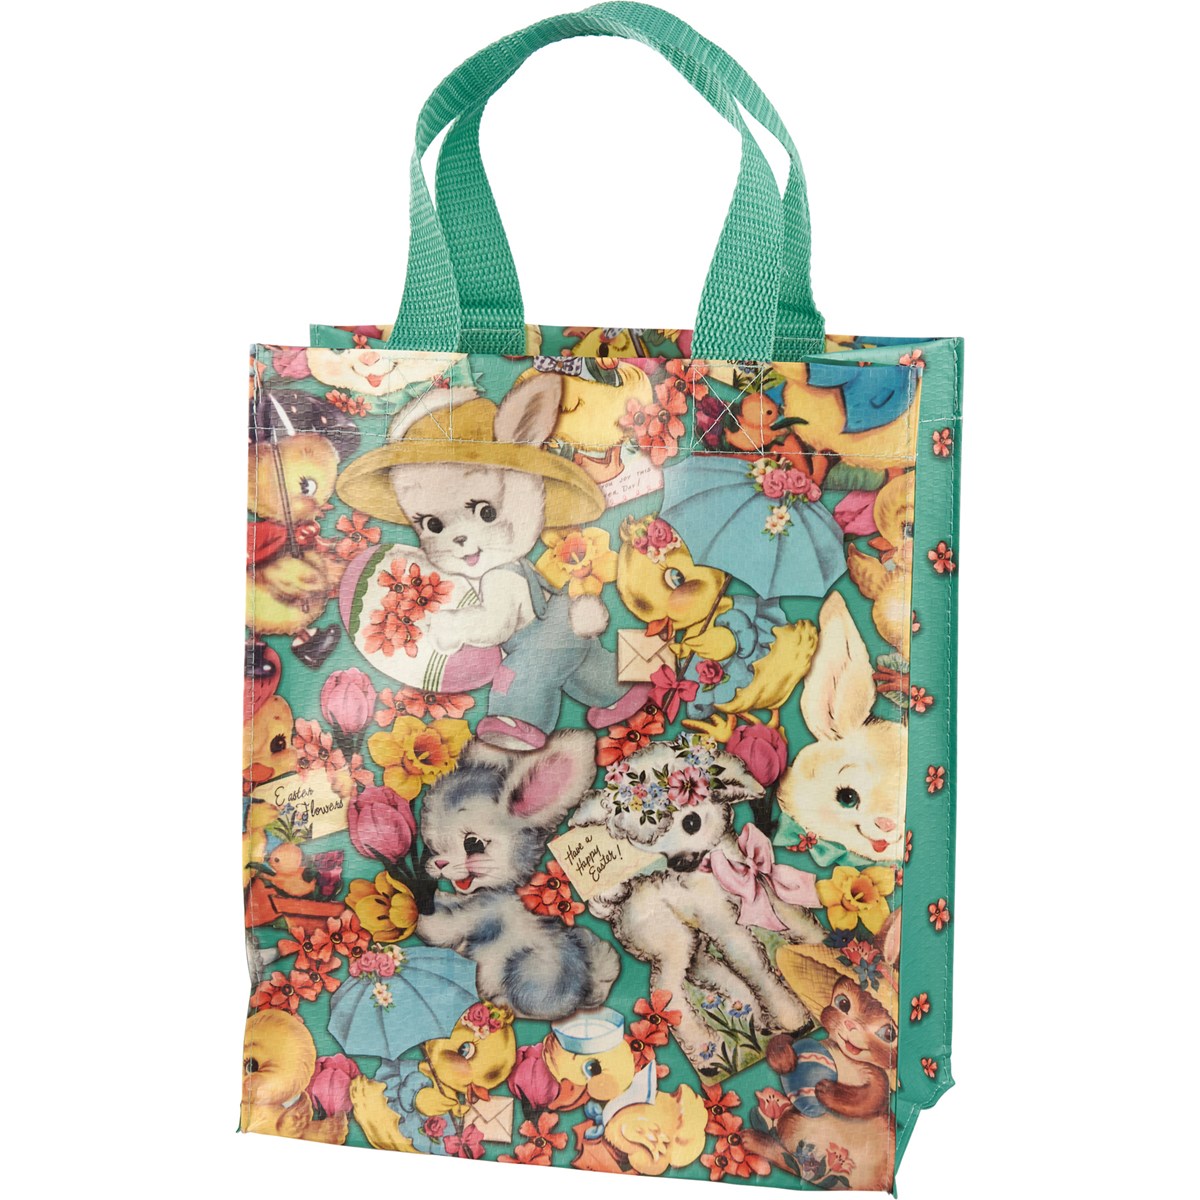 Vintage Easter Daily Tote - Post-Consumer Material, Nylon